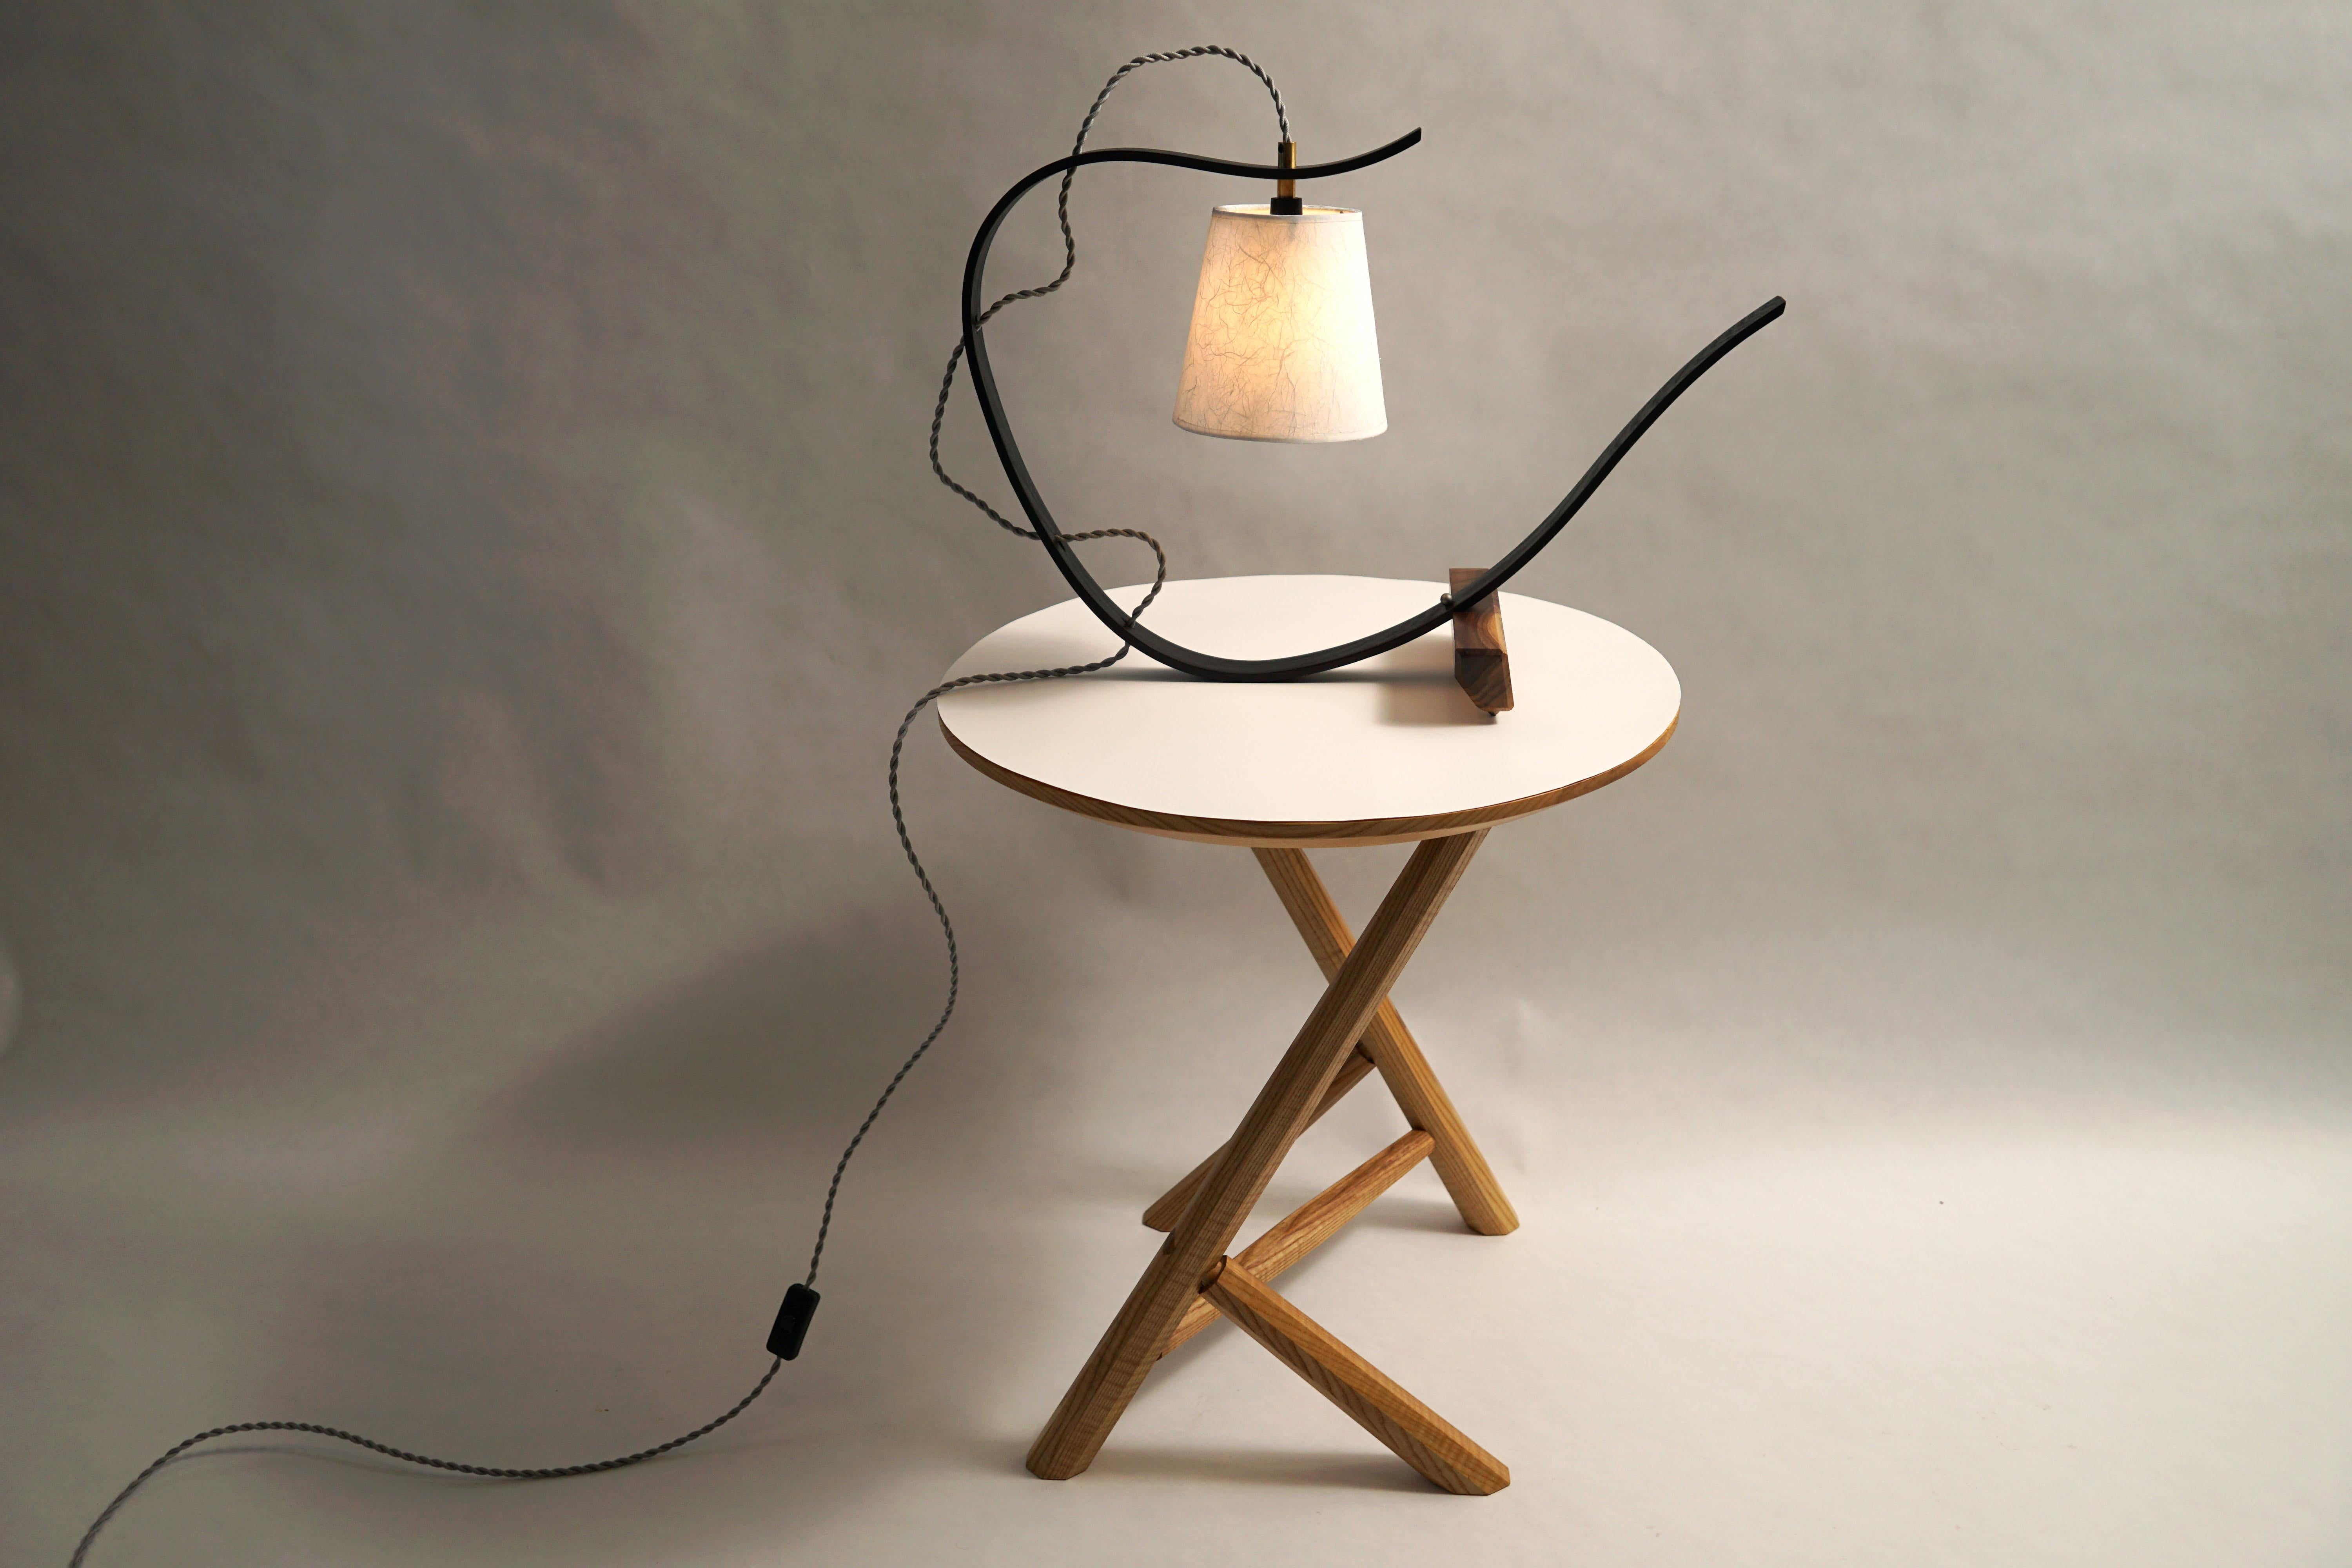 Scandinavian Modern Curved Table Lamp Sculpture, Handcrafted in Ash Wood with Walnut Base For Sale